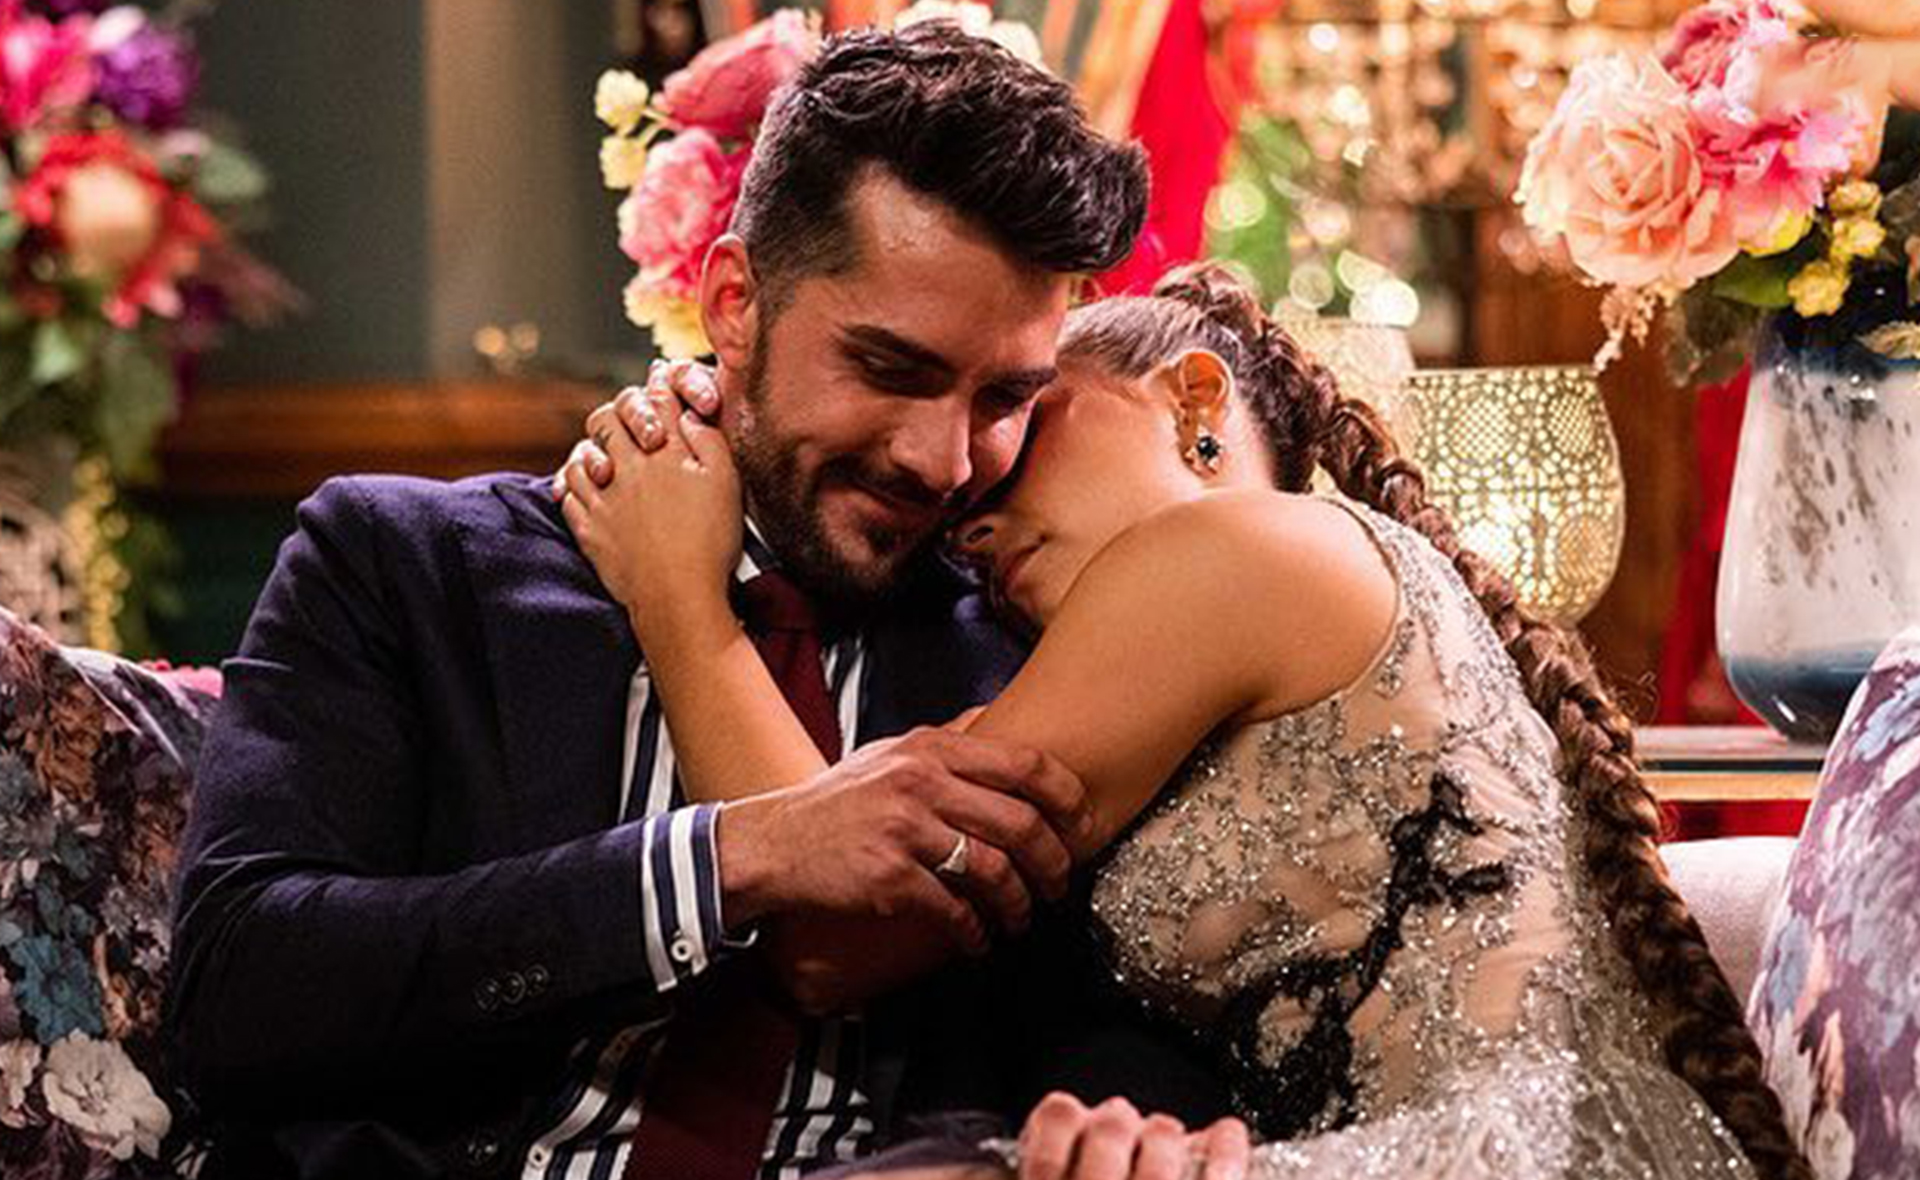 Spoiler alert! Does this prove that Darvid wins Brooke Blurton’s heart on The Bachelorette 2021?